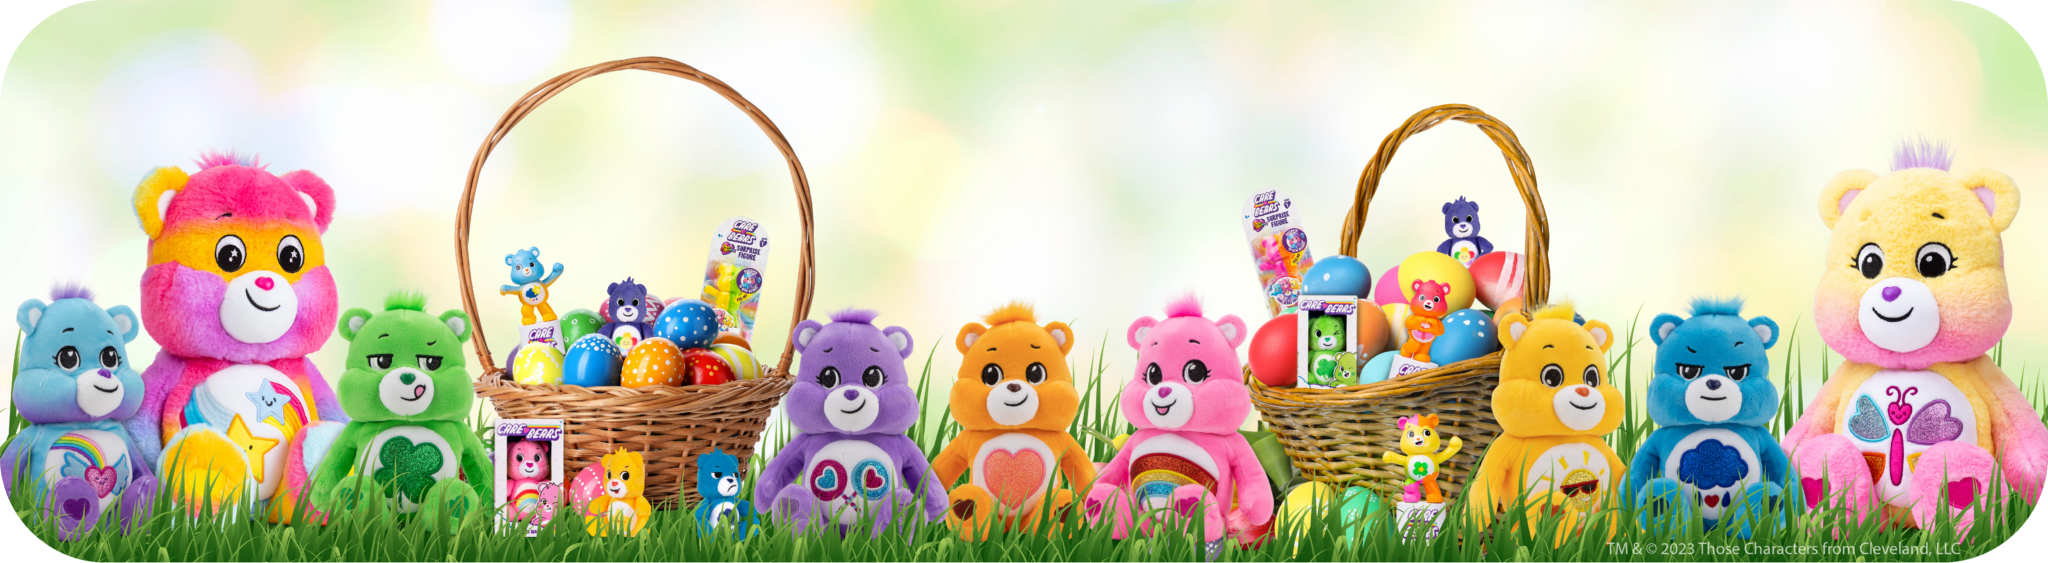 Easter banner showing a line of care bears arranged in a grass setting with eggs and baskets.